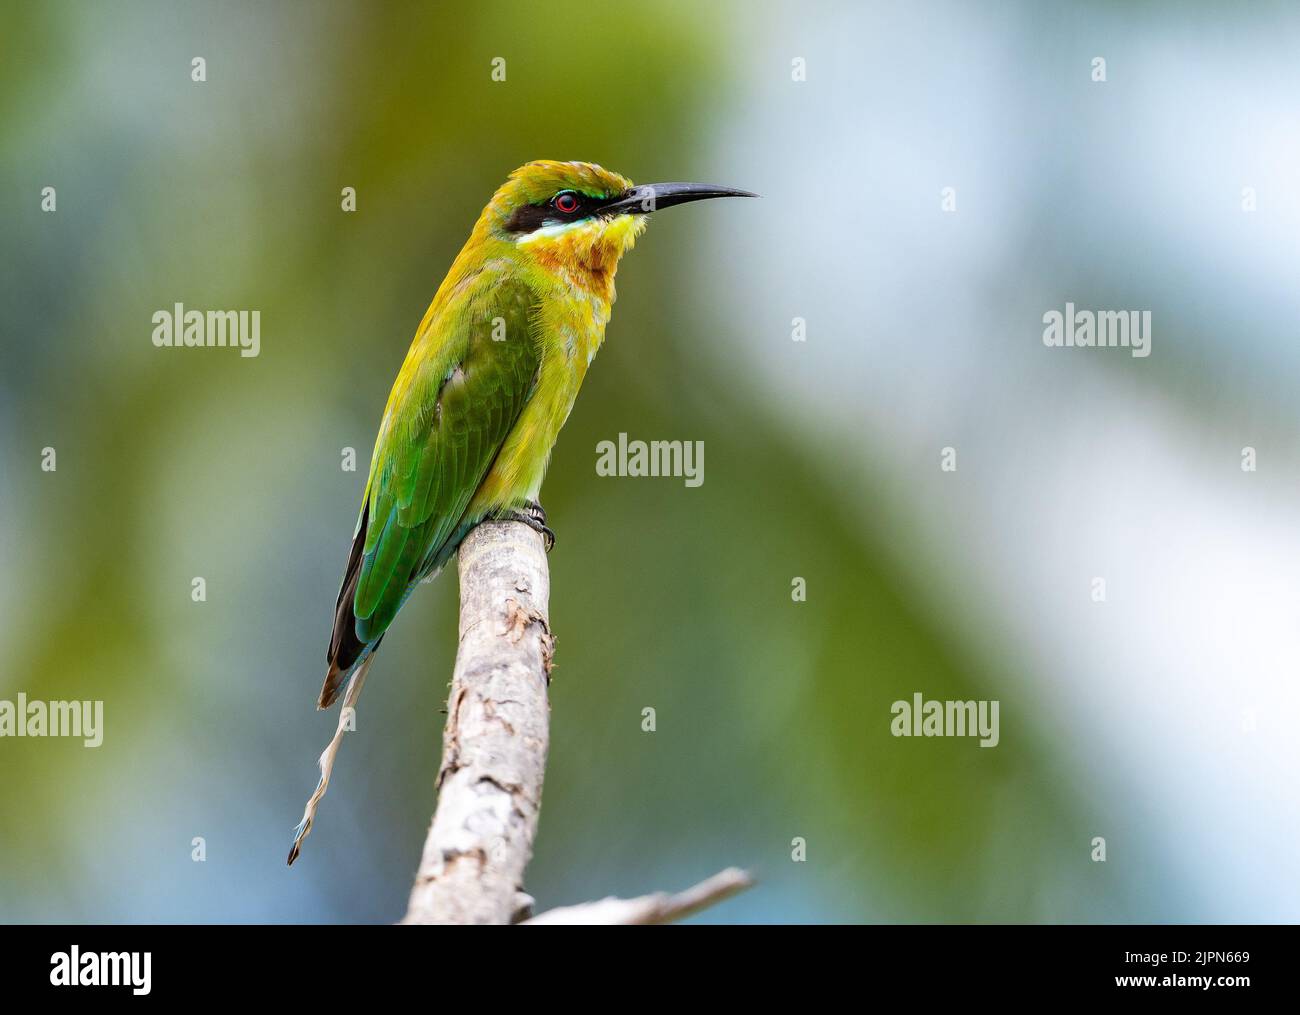 A Blue-tailed Bee-eater (Merops philippinus) perched on a branch. Sulawesi, Indonesia. Stock Photo